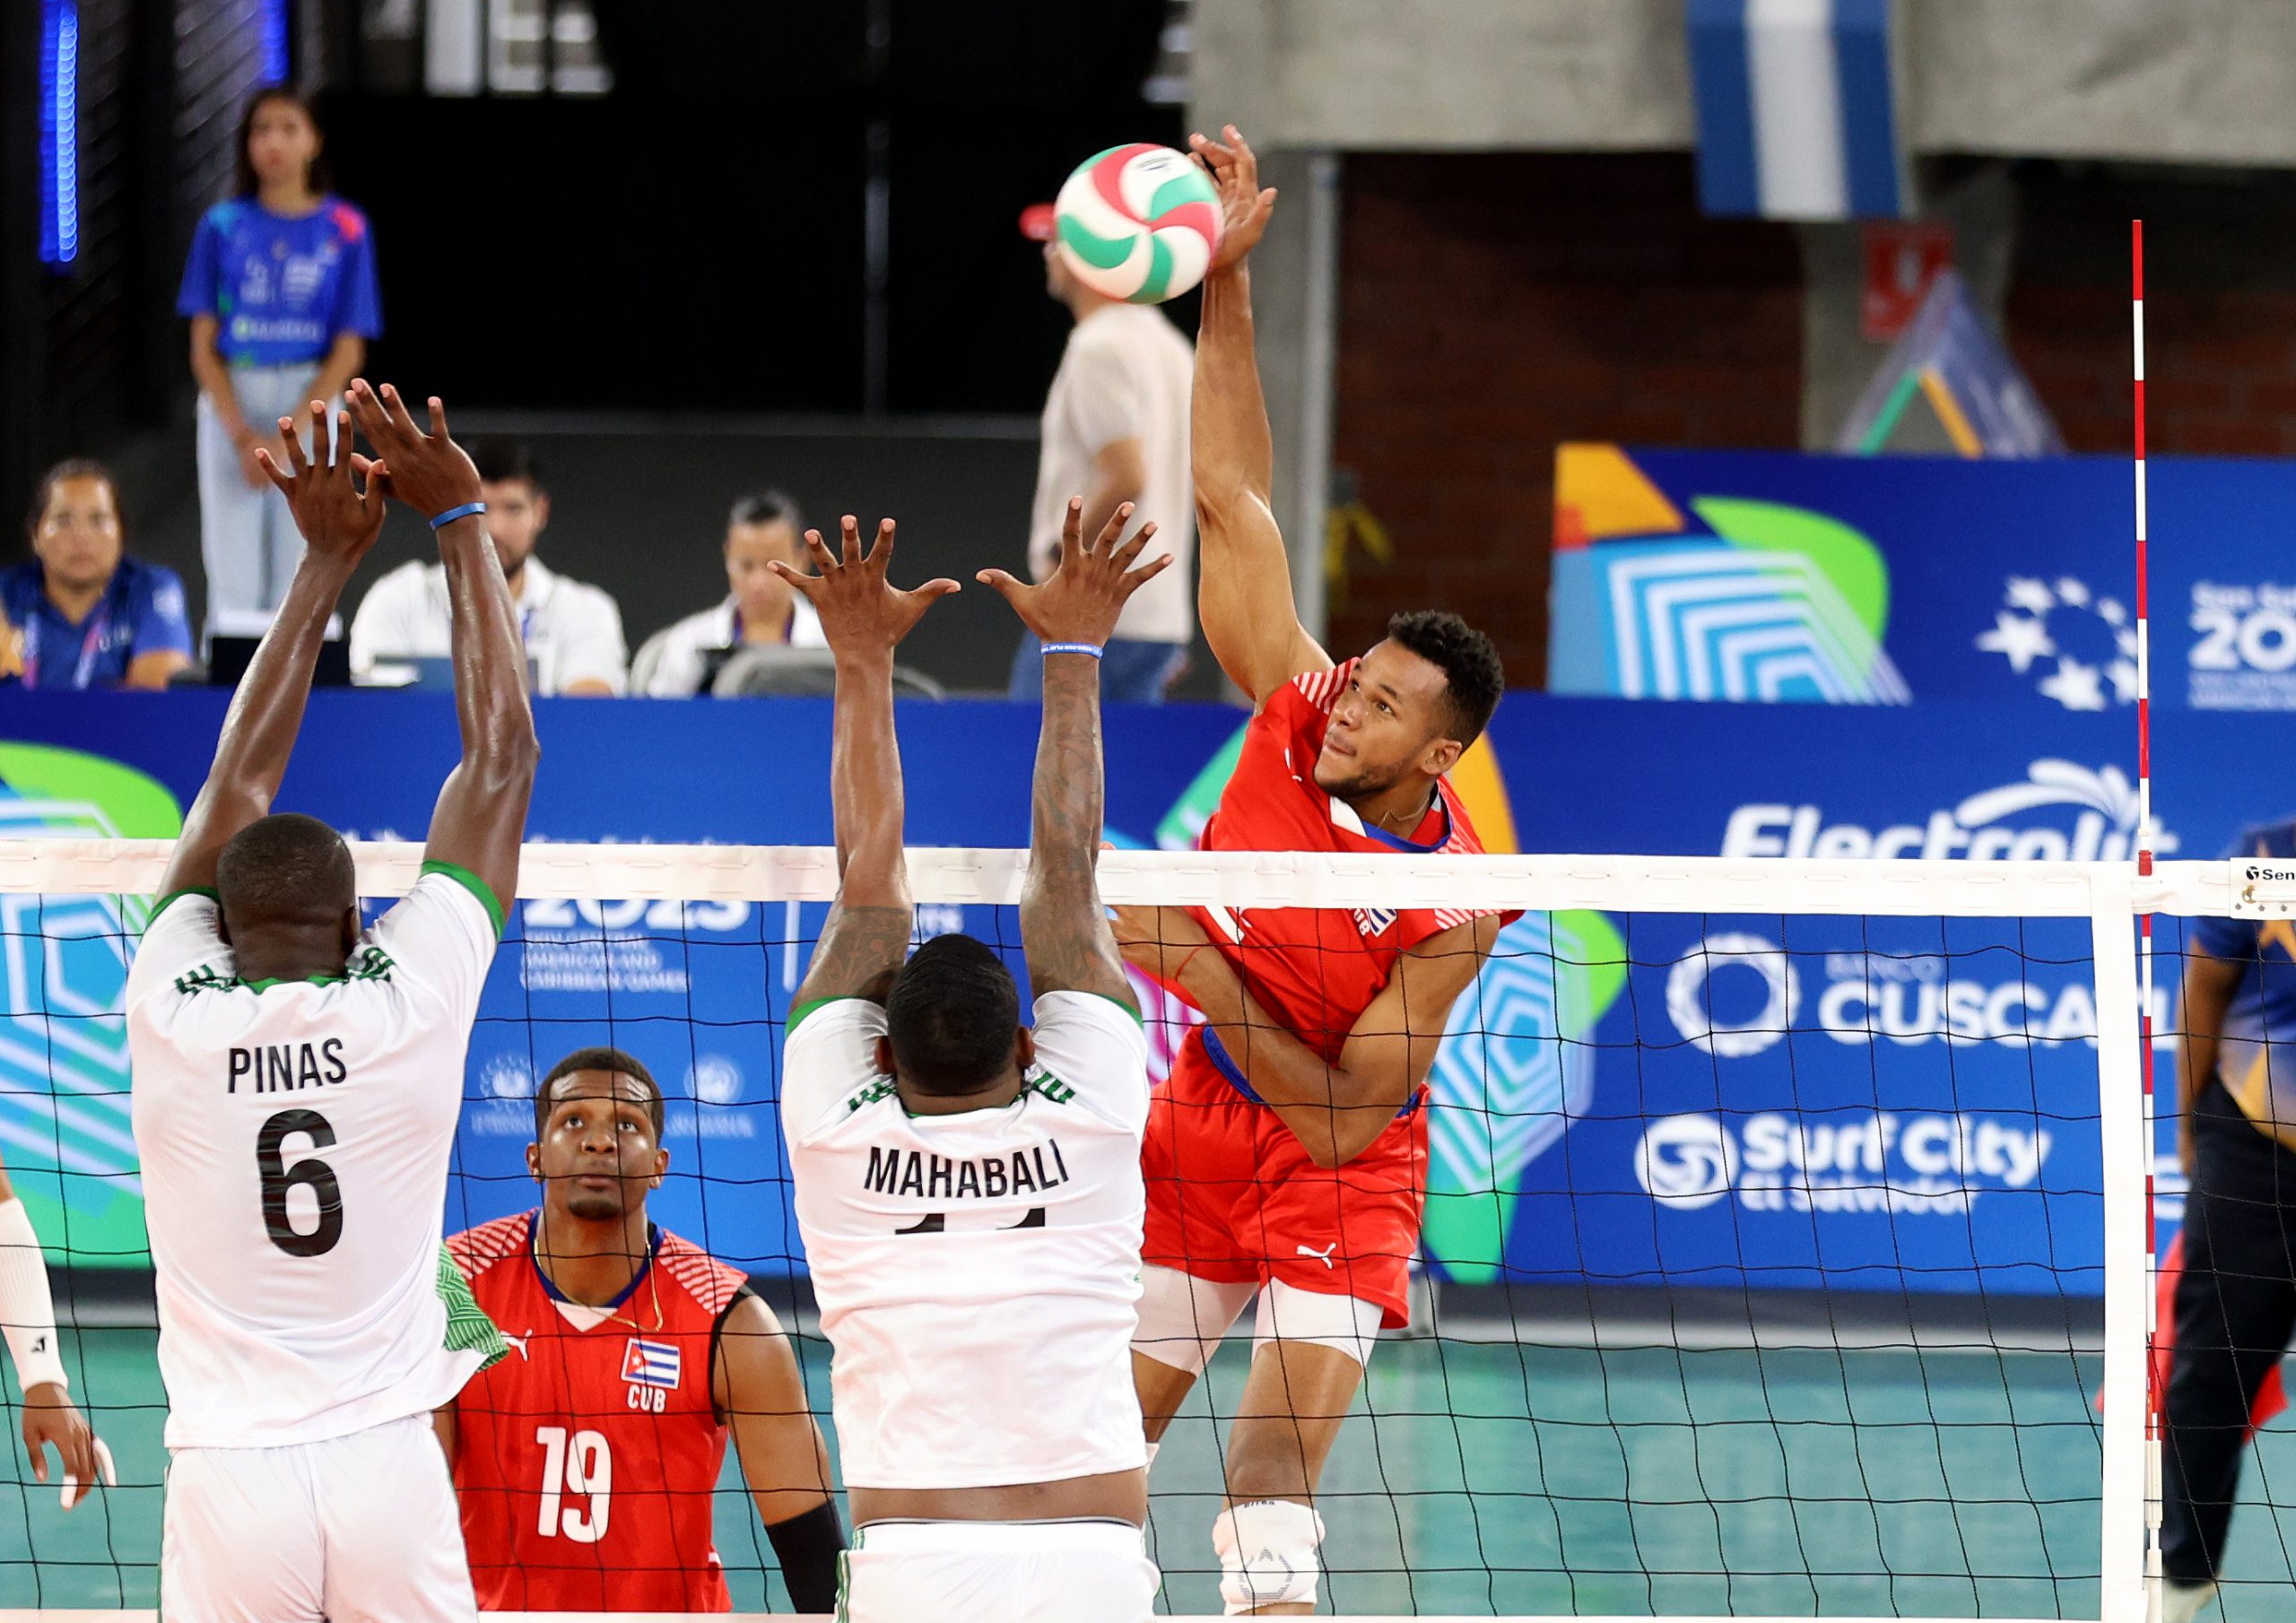 Cuba starts CAC Games defeating Suriname in straight sets